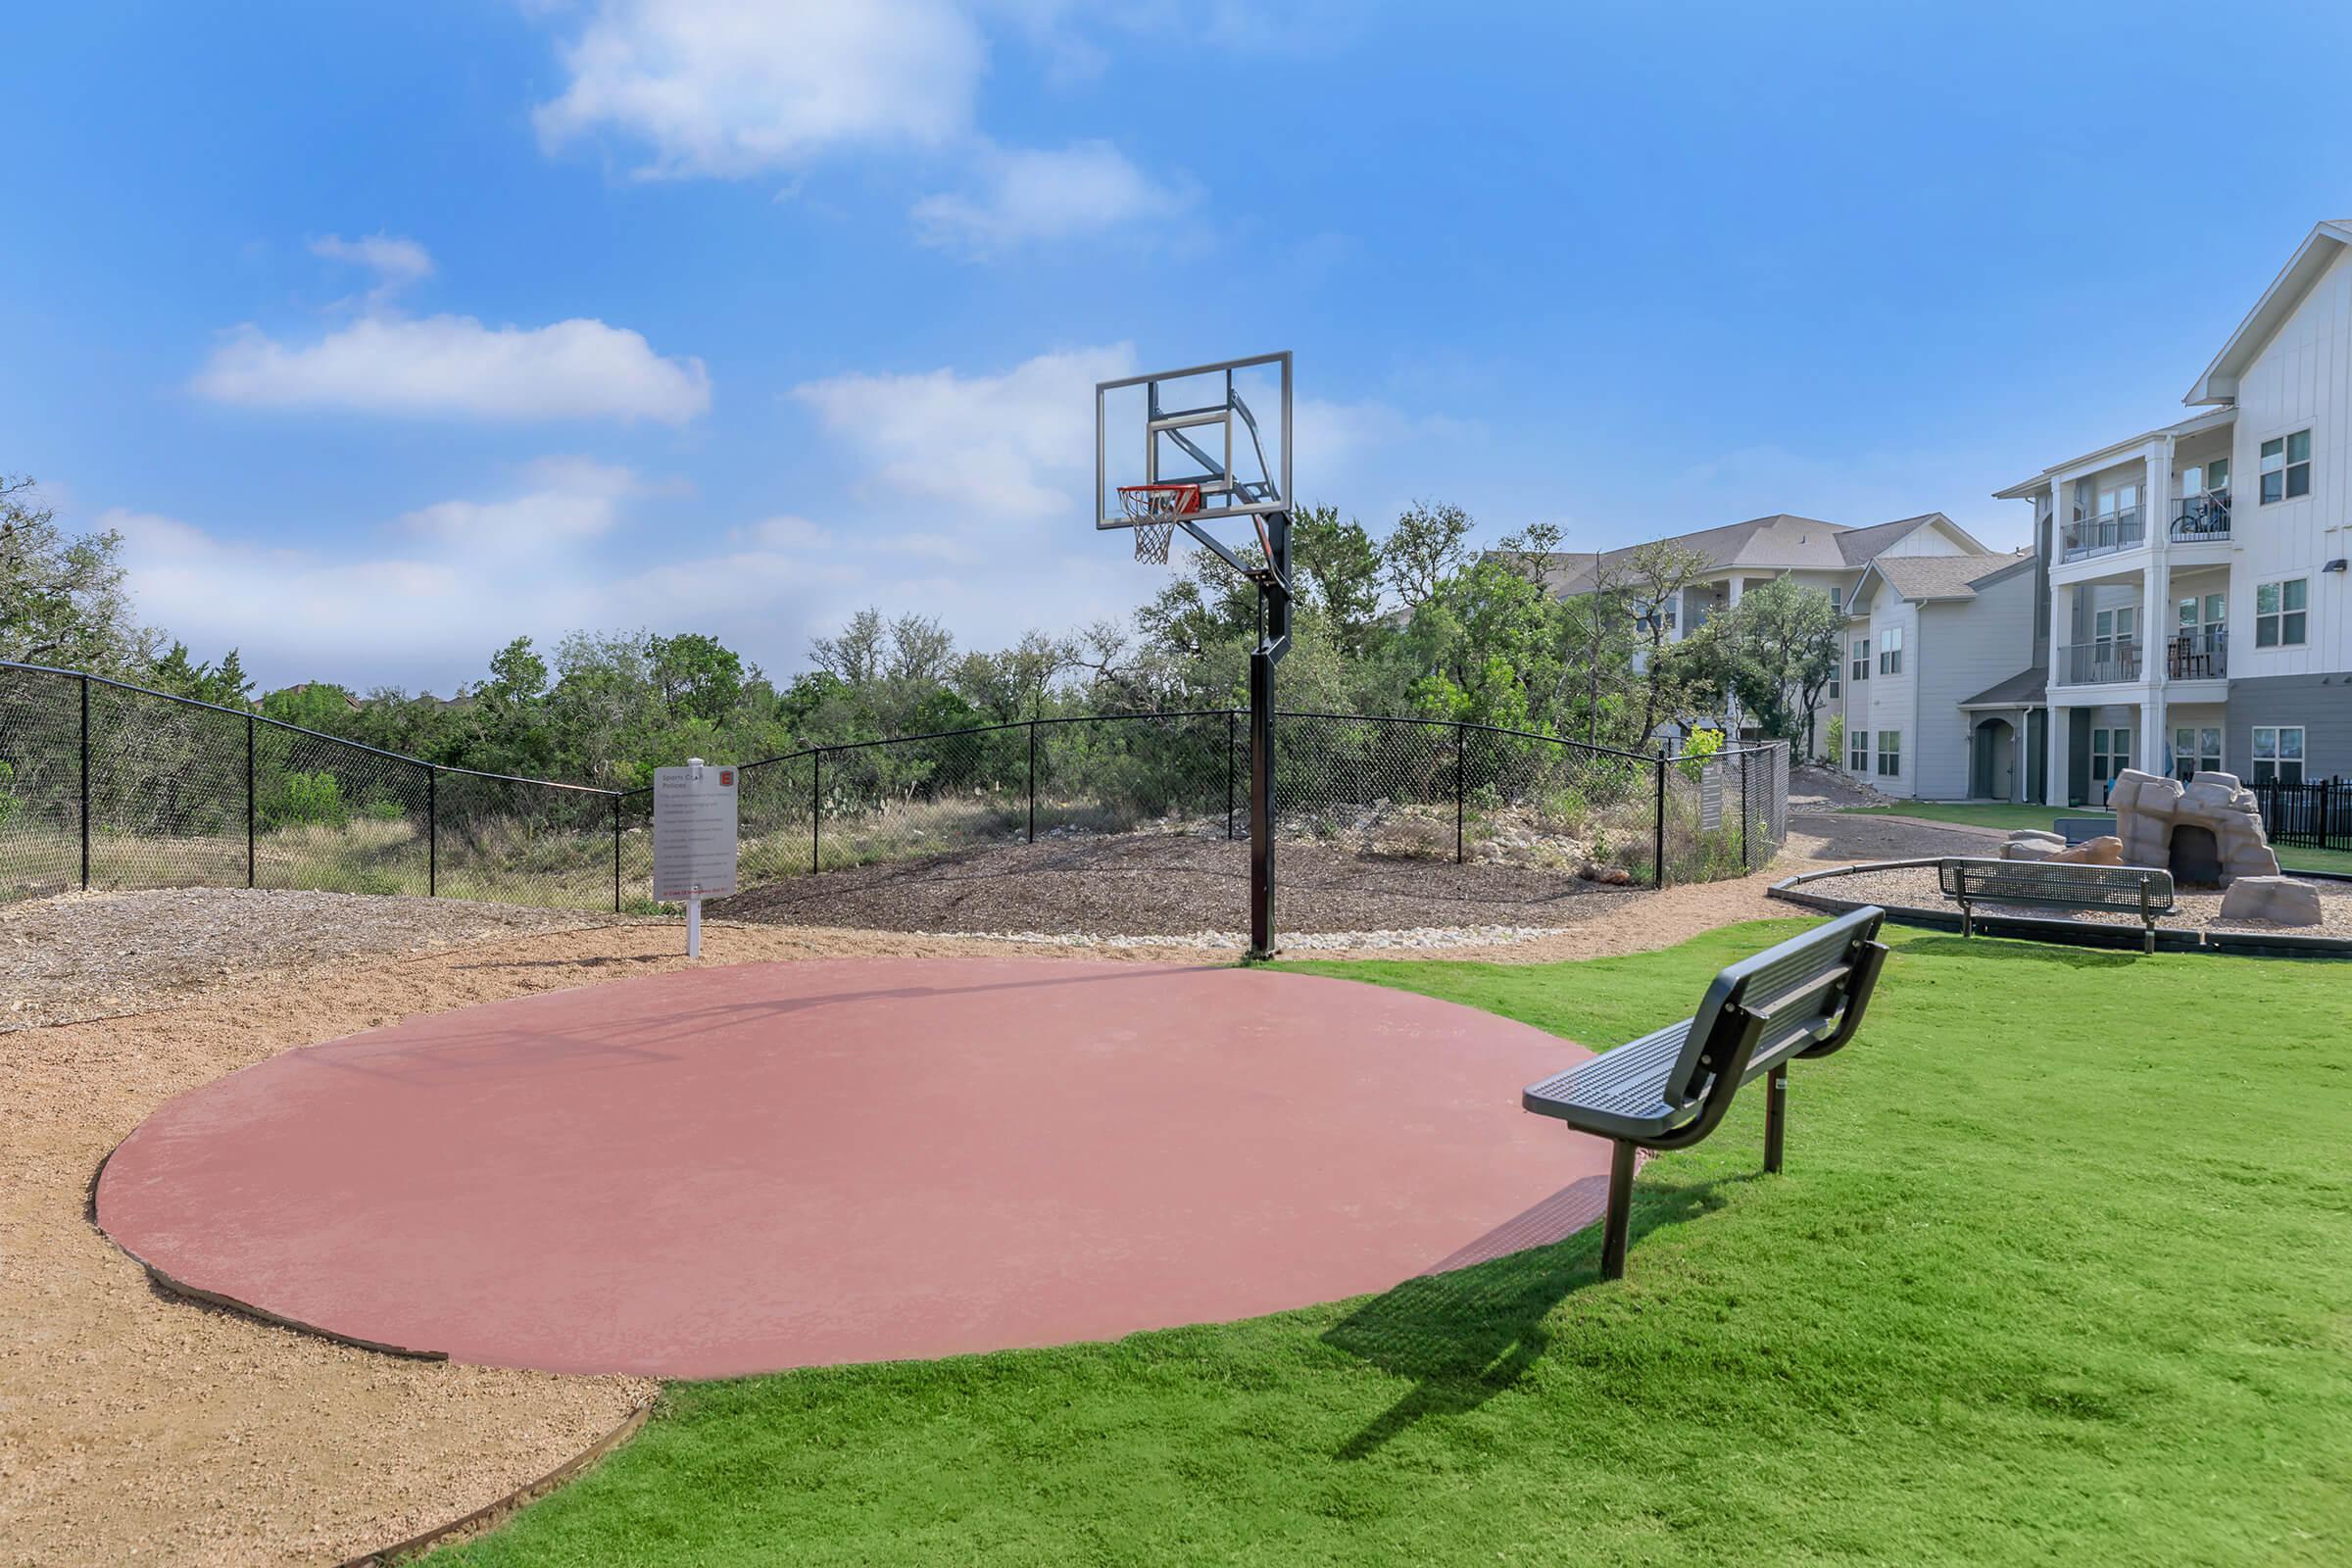 SHOOT SOME HOOP AT OUR BASKETBALL COURT